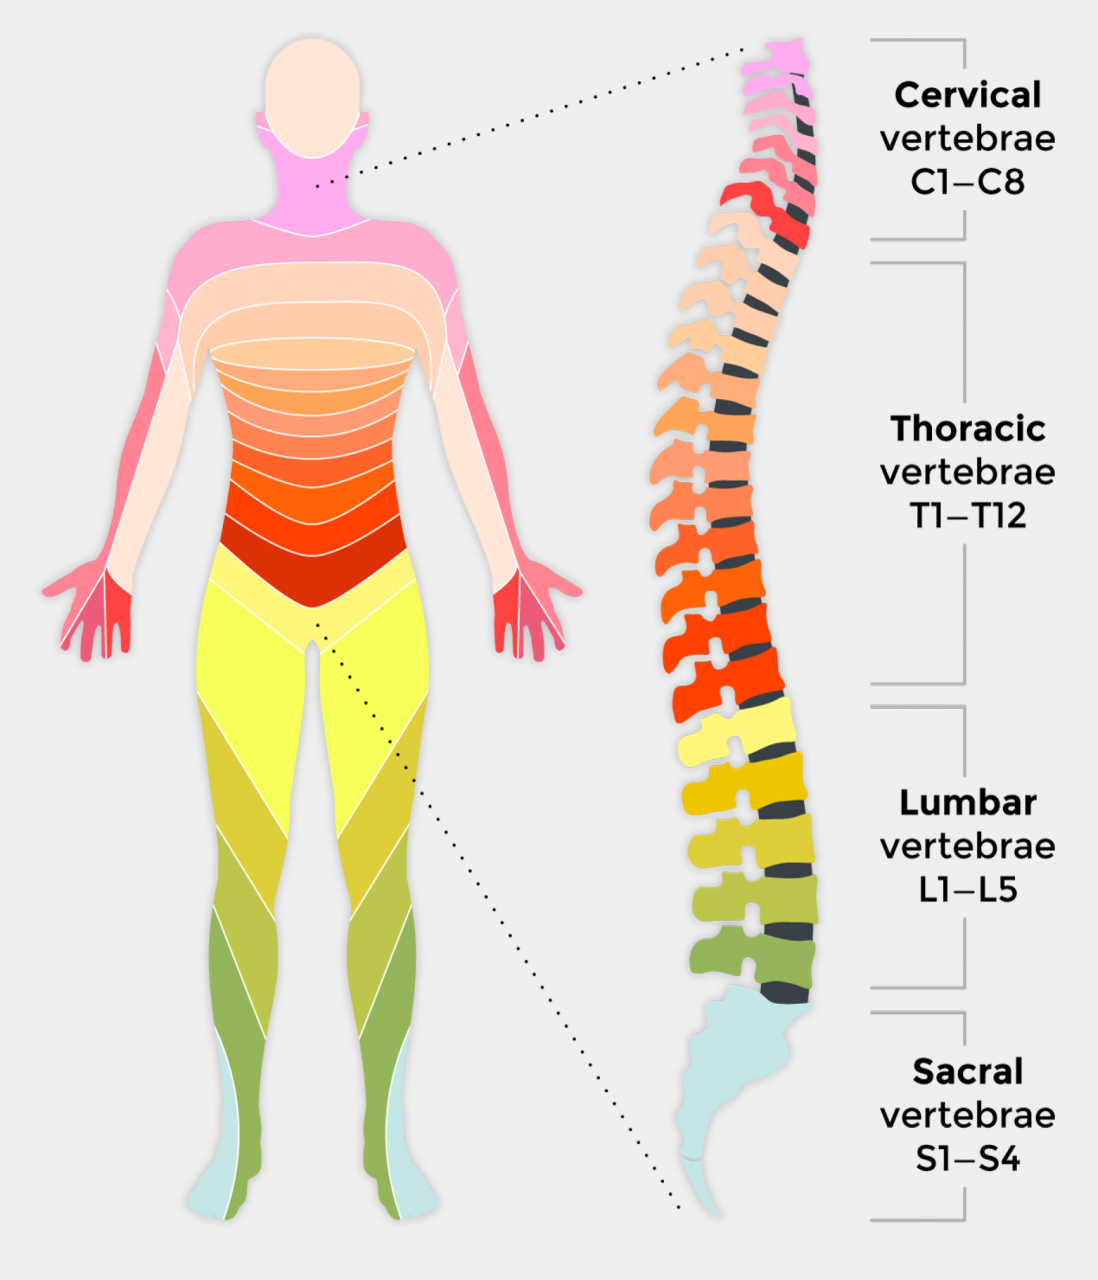 Understanding the Complex Structure and Functions of the Human Spinal Cord